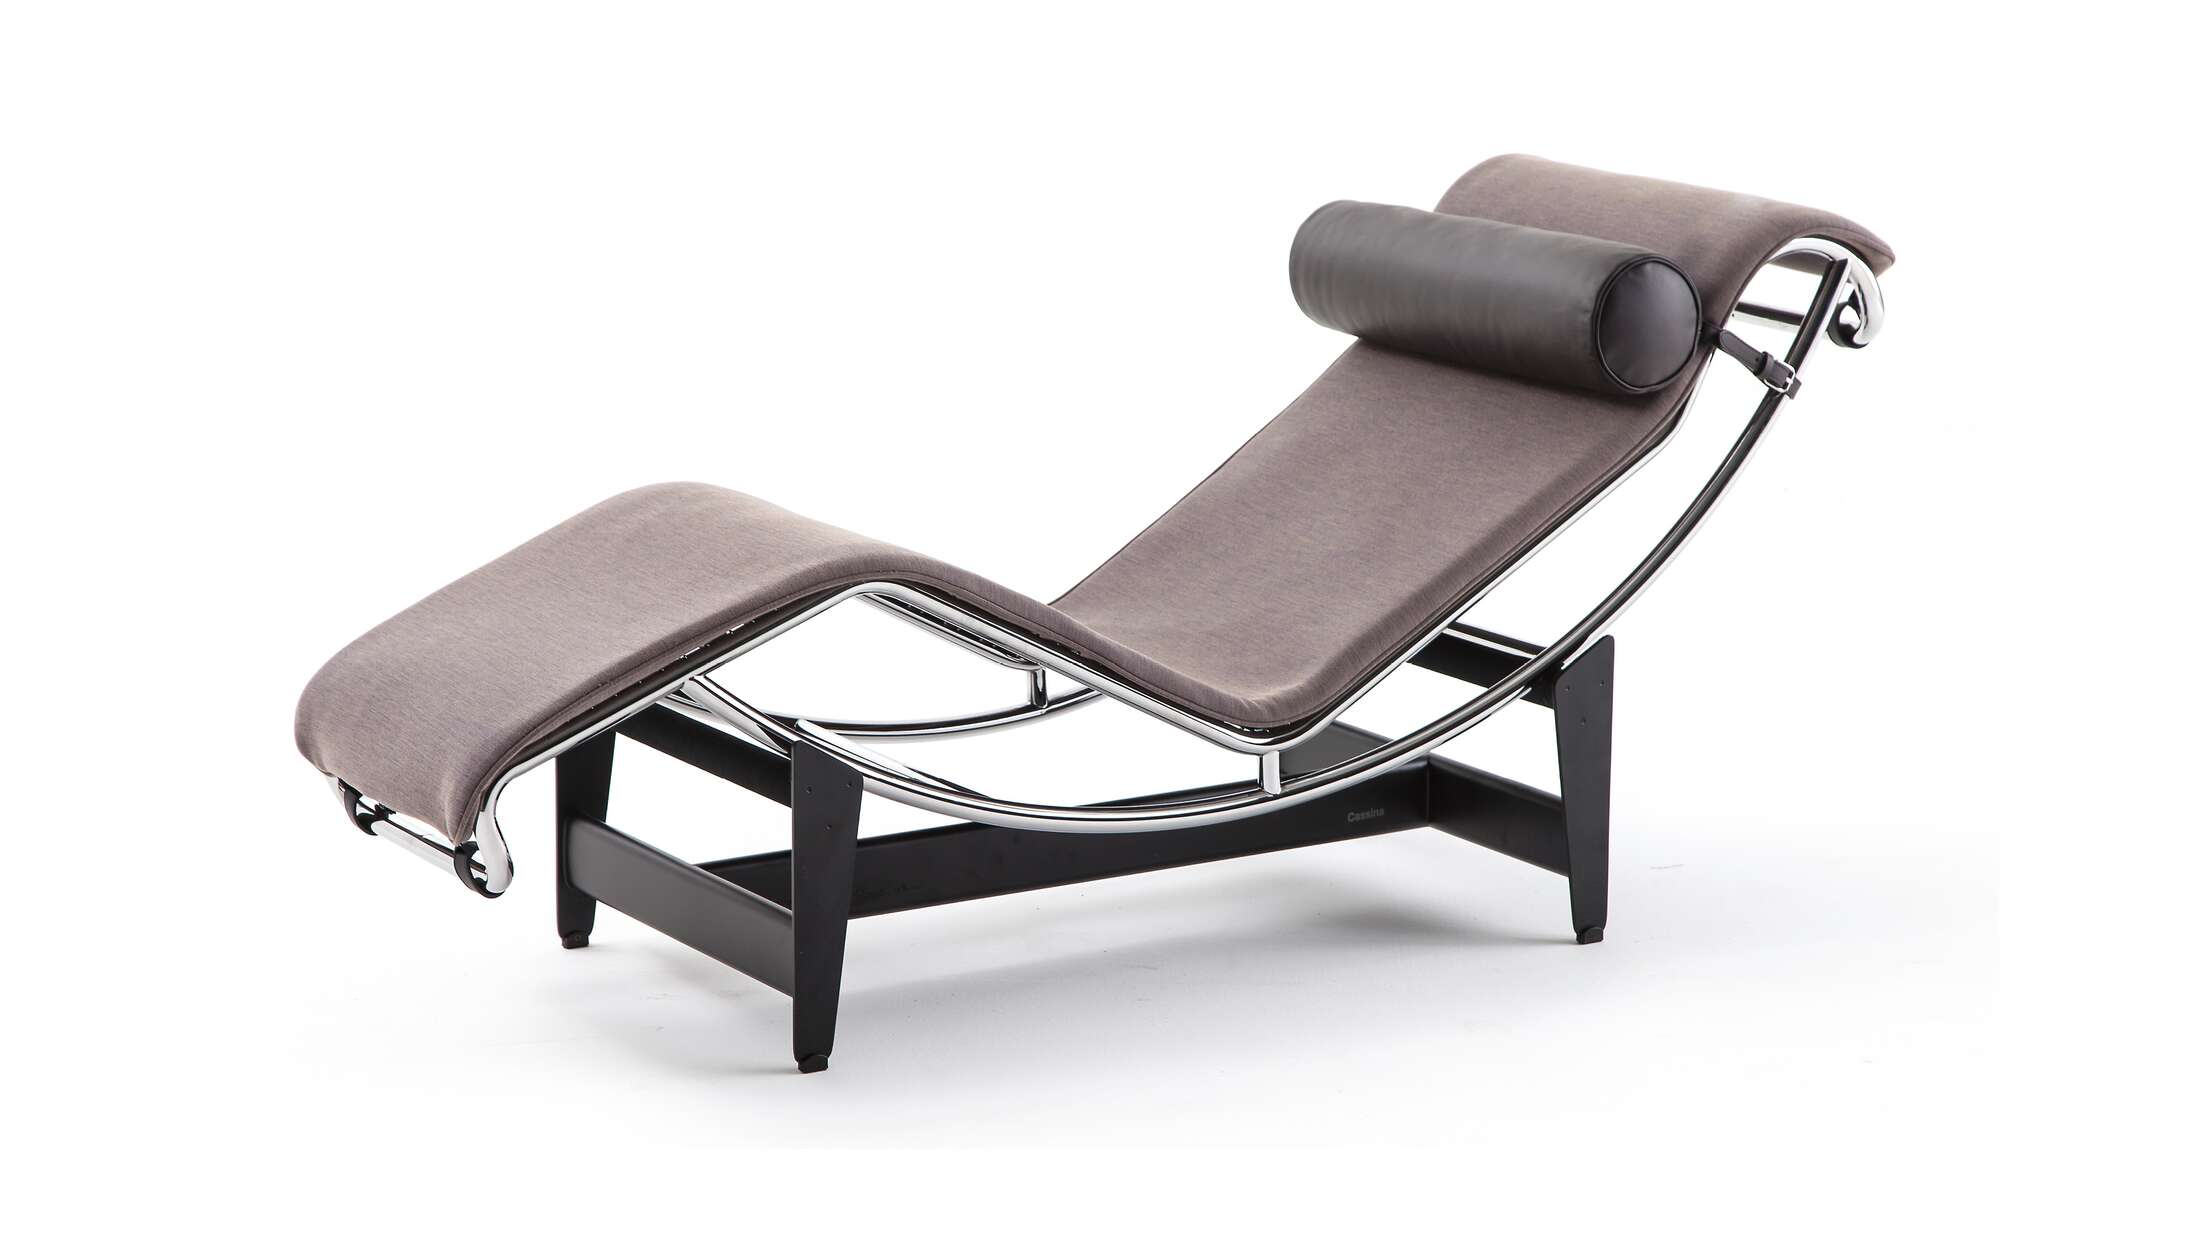 Prices vary dependent on the chosen material. 

Chaise lounge designed by Le Corbusier, Pierre Jeanneret, Charlotte Perriand in 1928. Manufactured by Cassina in Italy. Chaise lounge with adjustable polished trivalent chrome plated (CR3) steel frame.